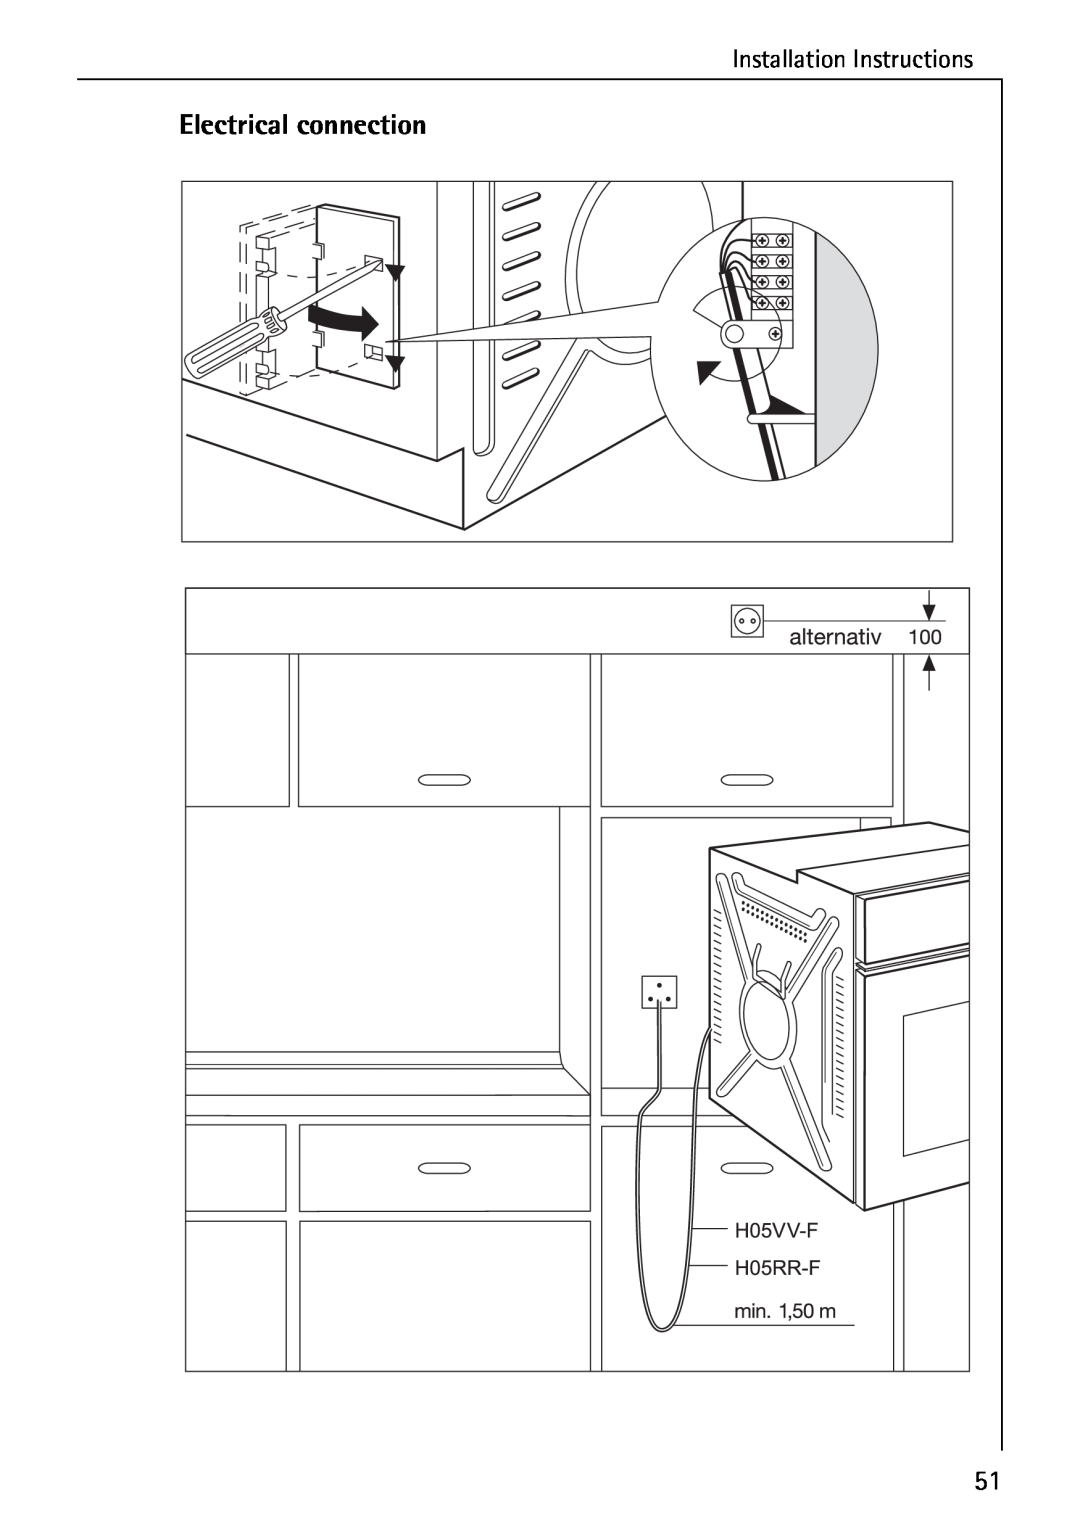 AEG B 2100 operating instructions Installation Instructions, Electrical connection 